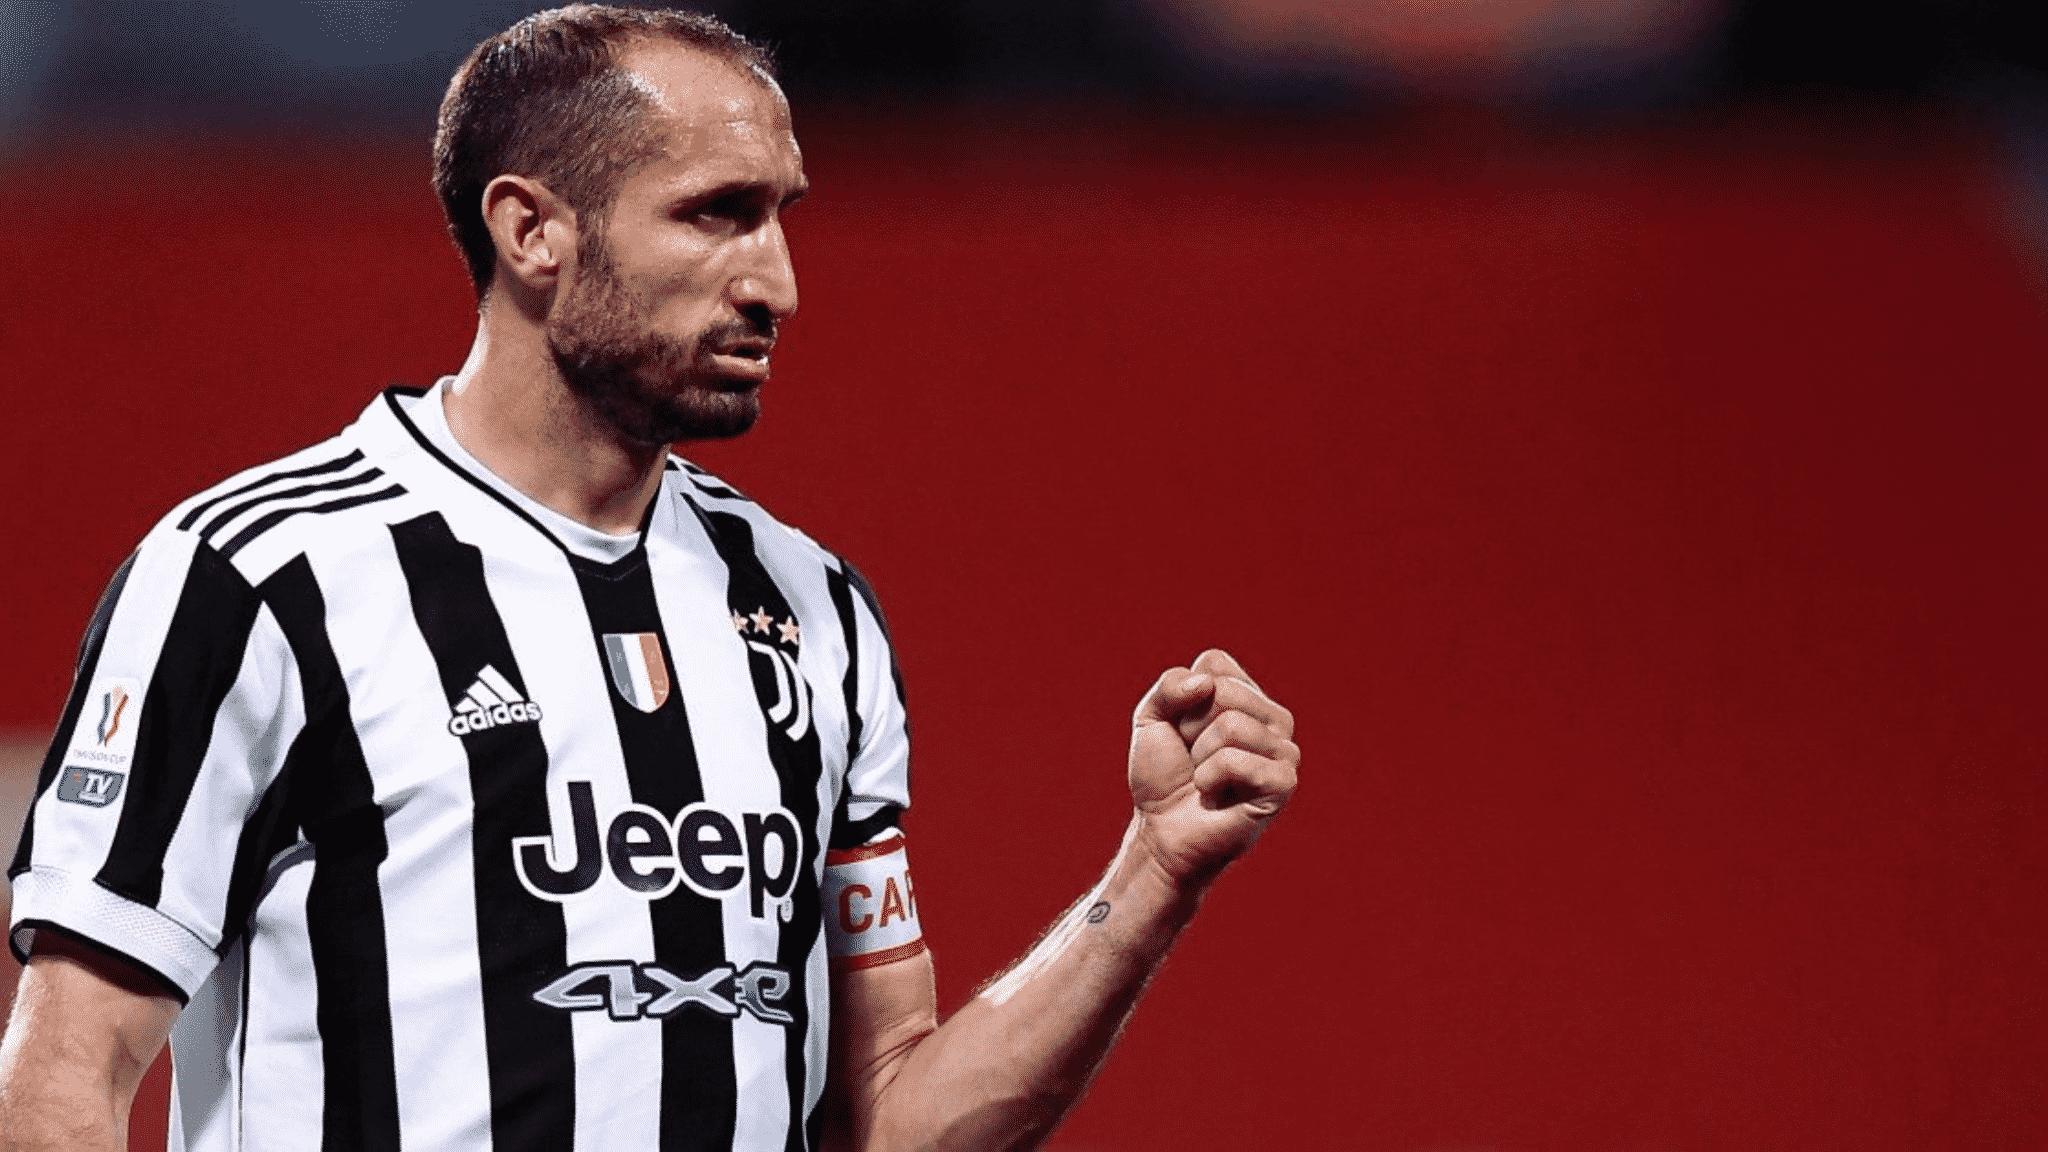 Giorgio Chiellini Set for MLS Move After 17 Years at Juventus, My Football Facts